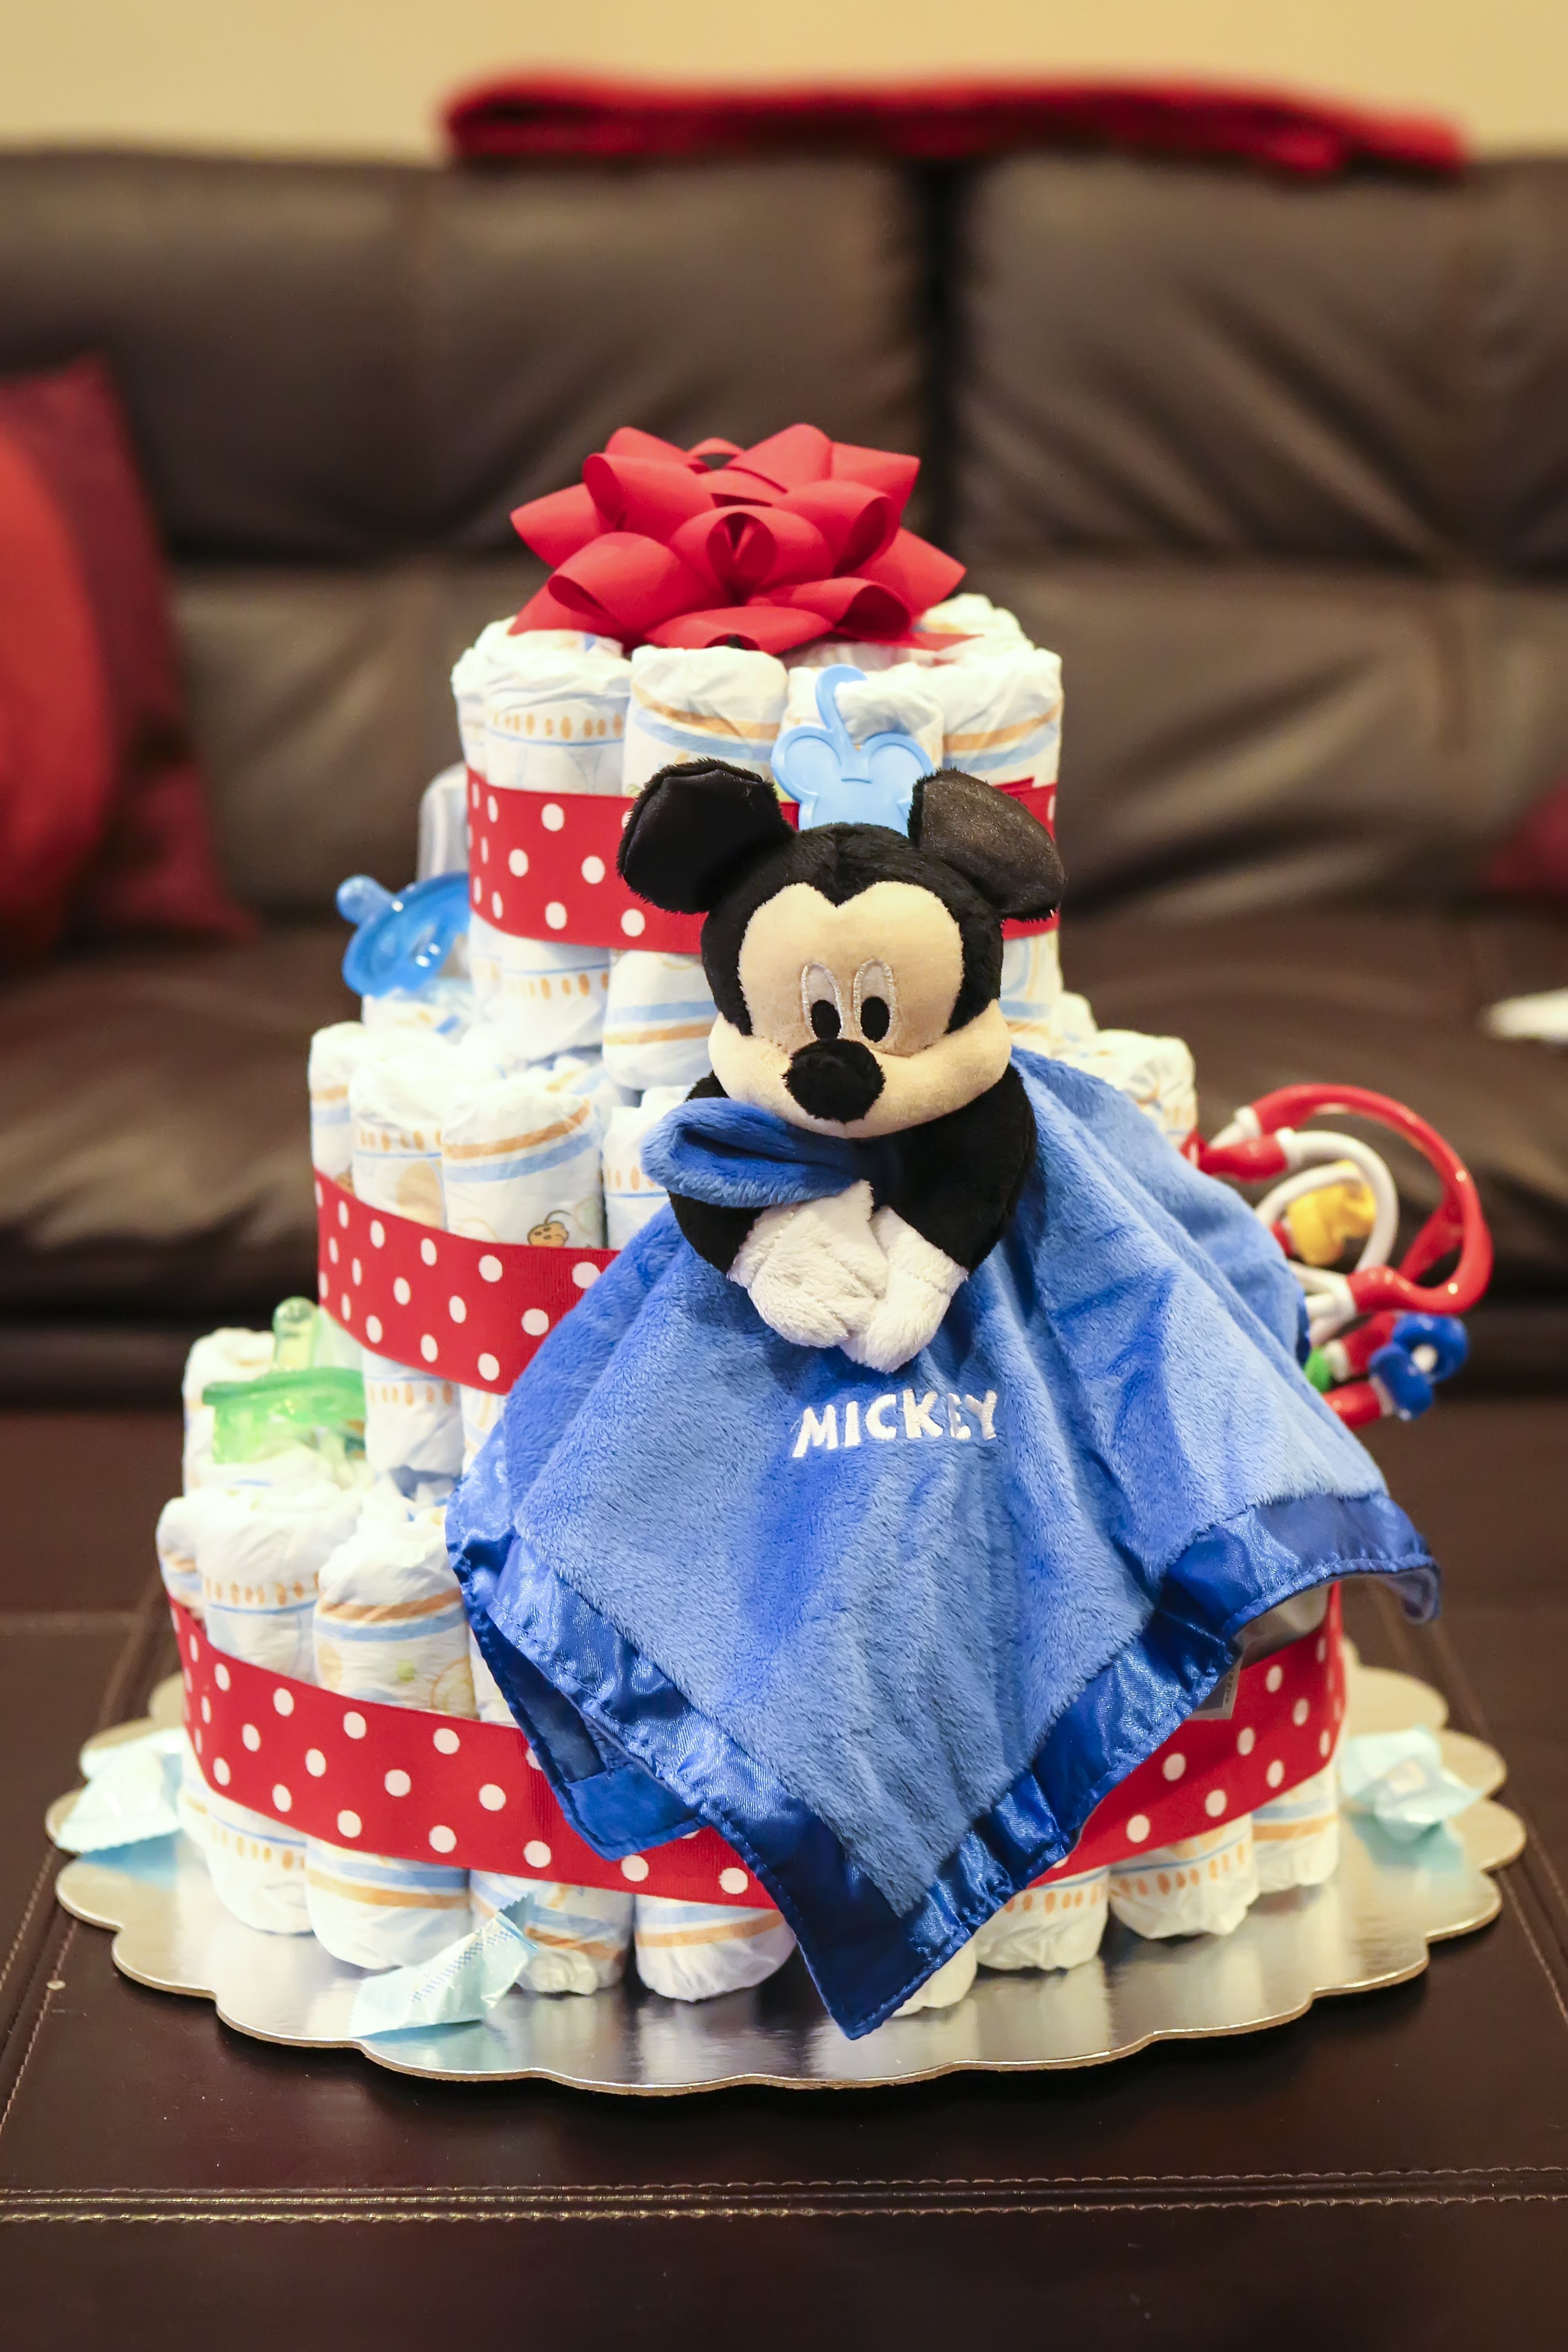 Our colorful Disney baby shower – Mickey everywhere!